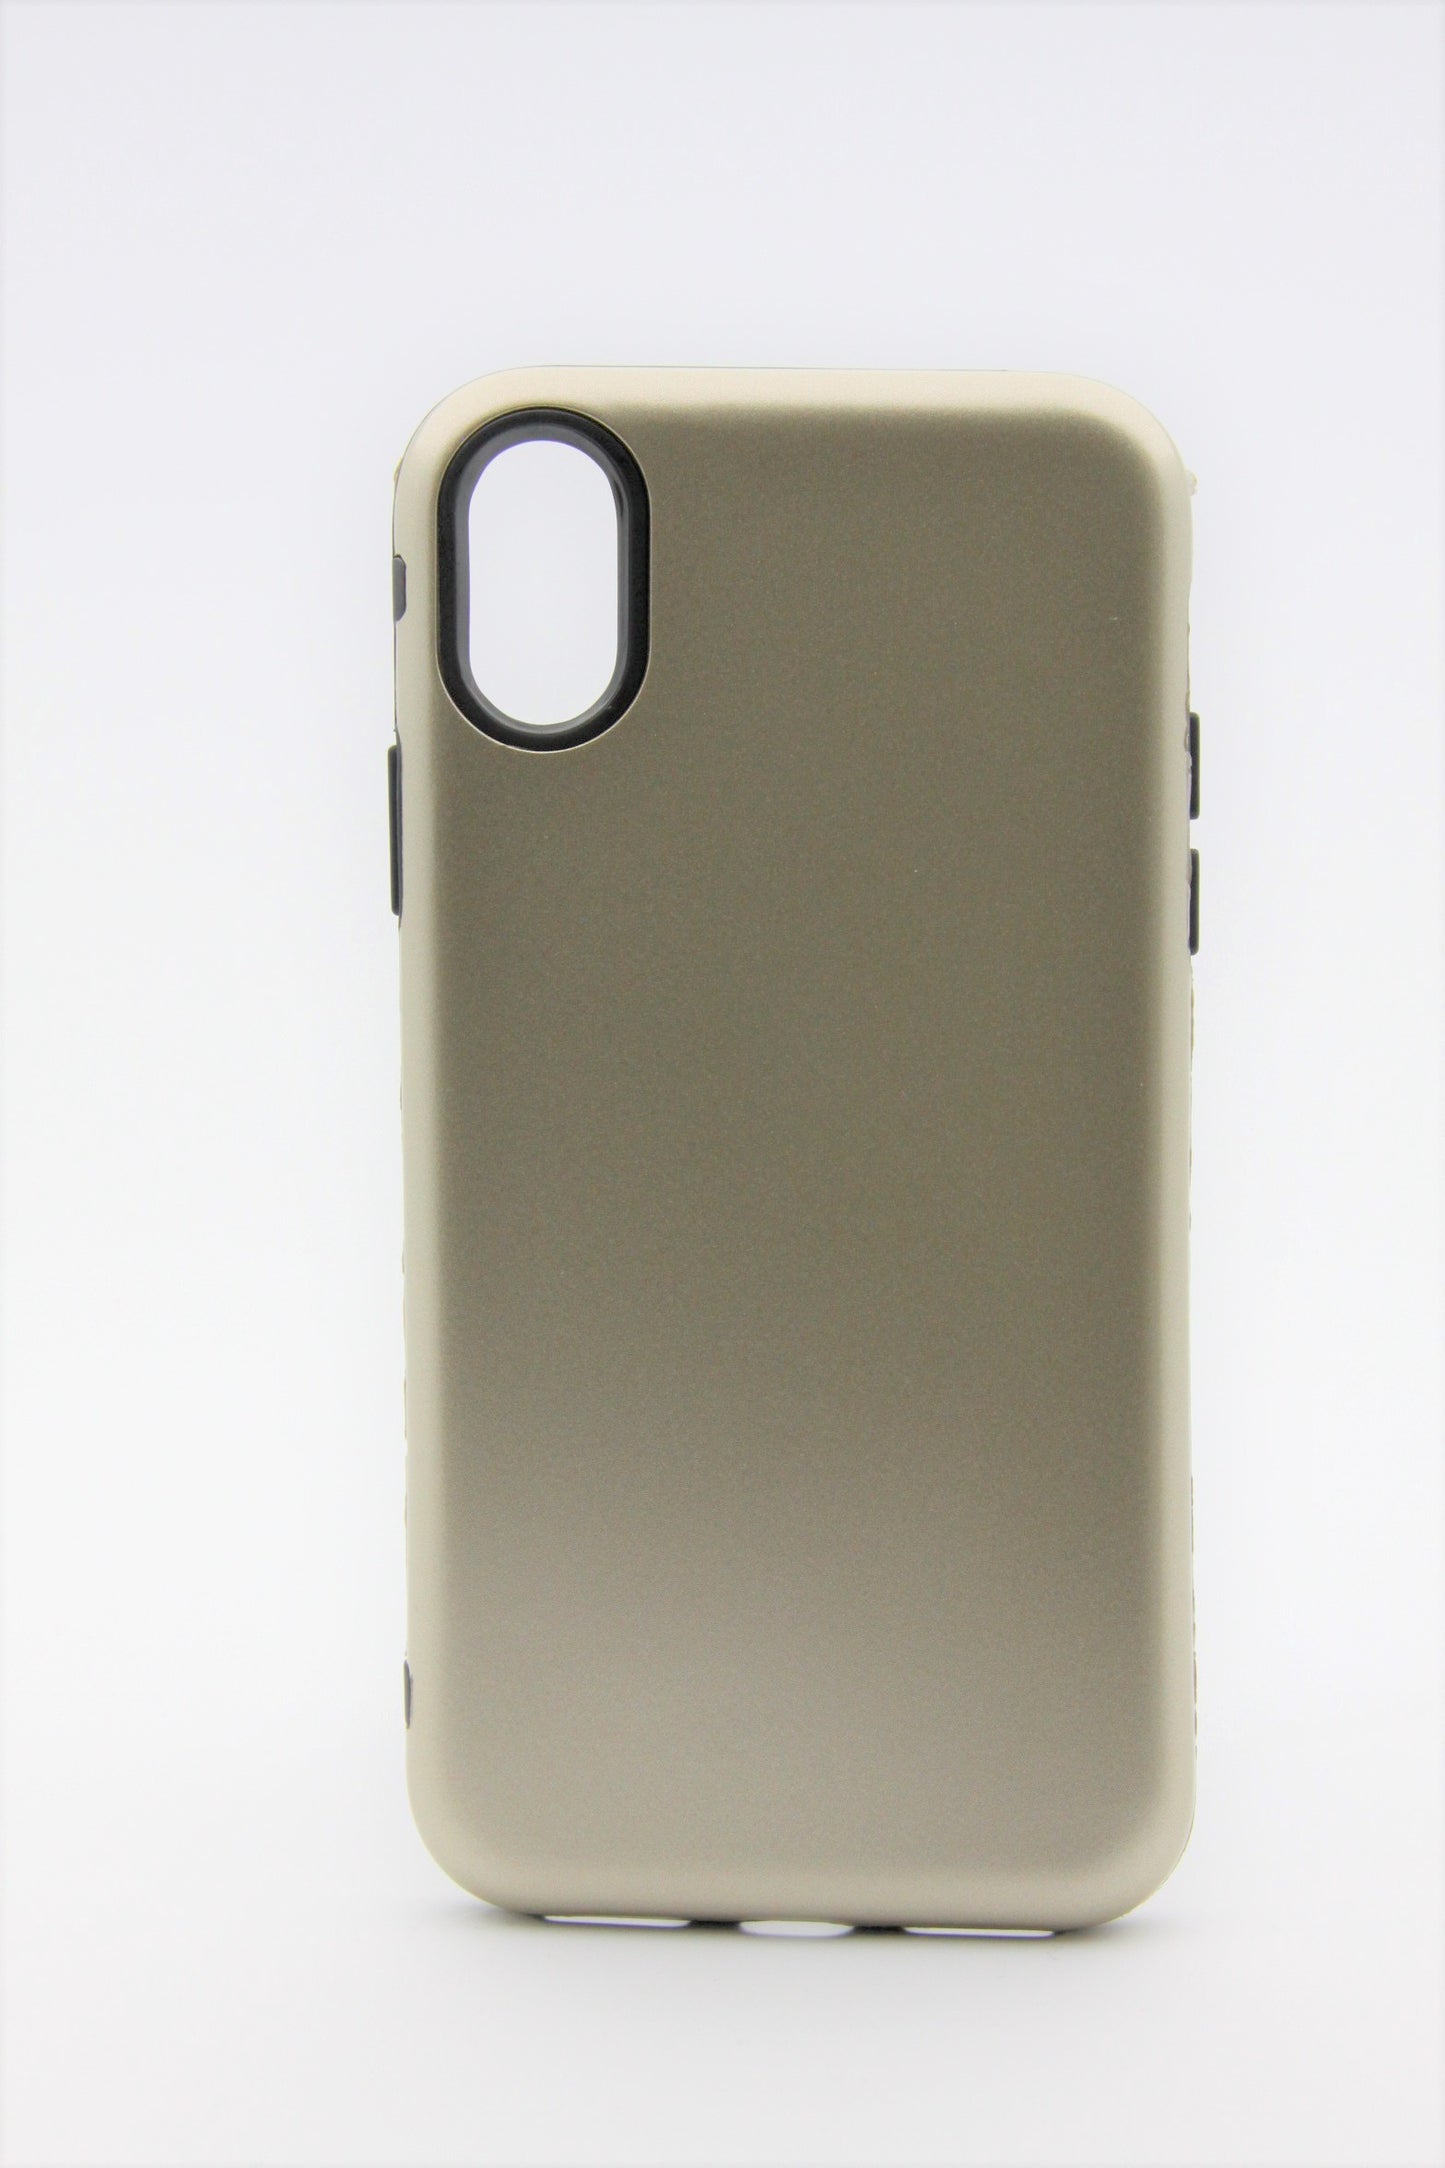 iPhone XR Dual Layer Case - Gold